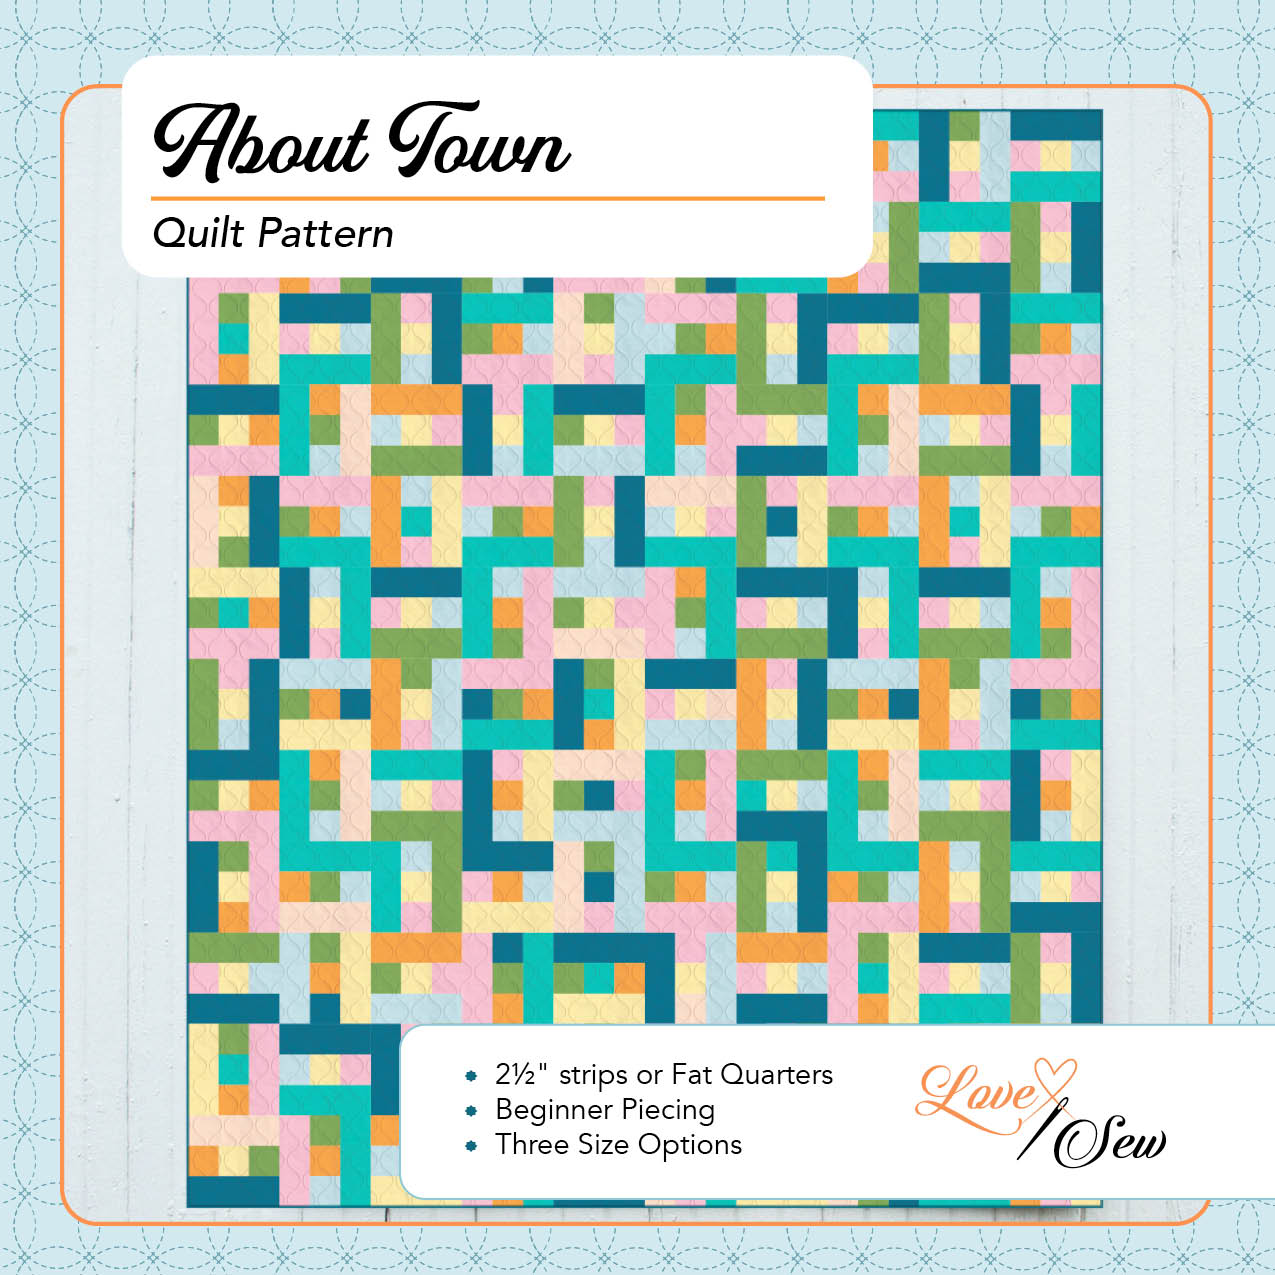 About Town Quilt Pattern